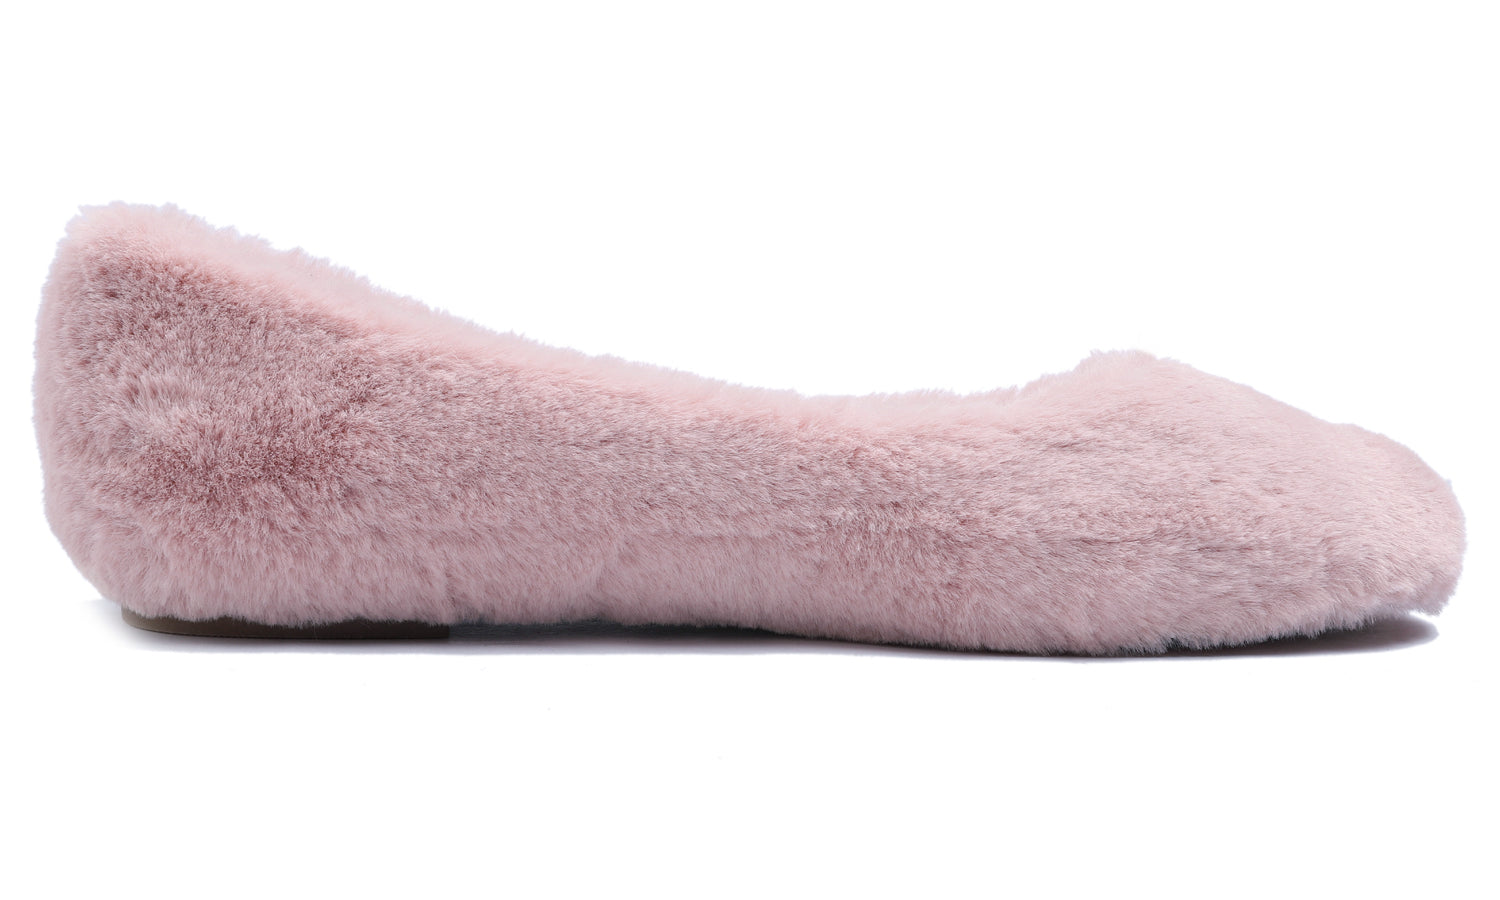 Feversole Women's Fashion Round Toe Puffy Warm Comfort Home Indoor Winter Soft Ballet Slippers Pink Plush